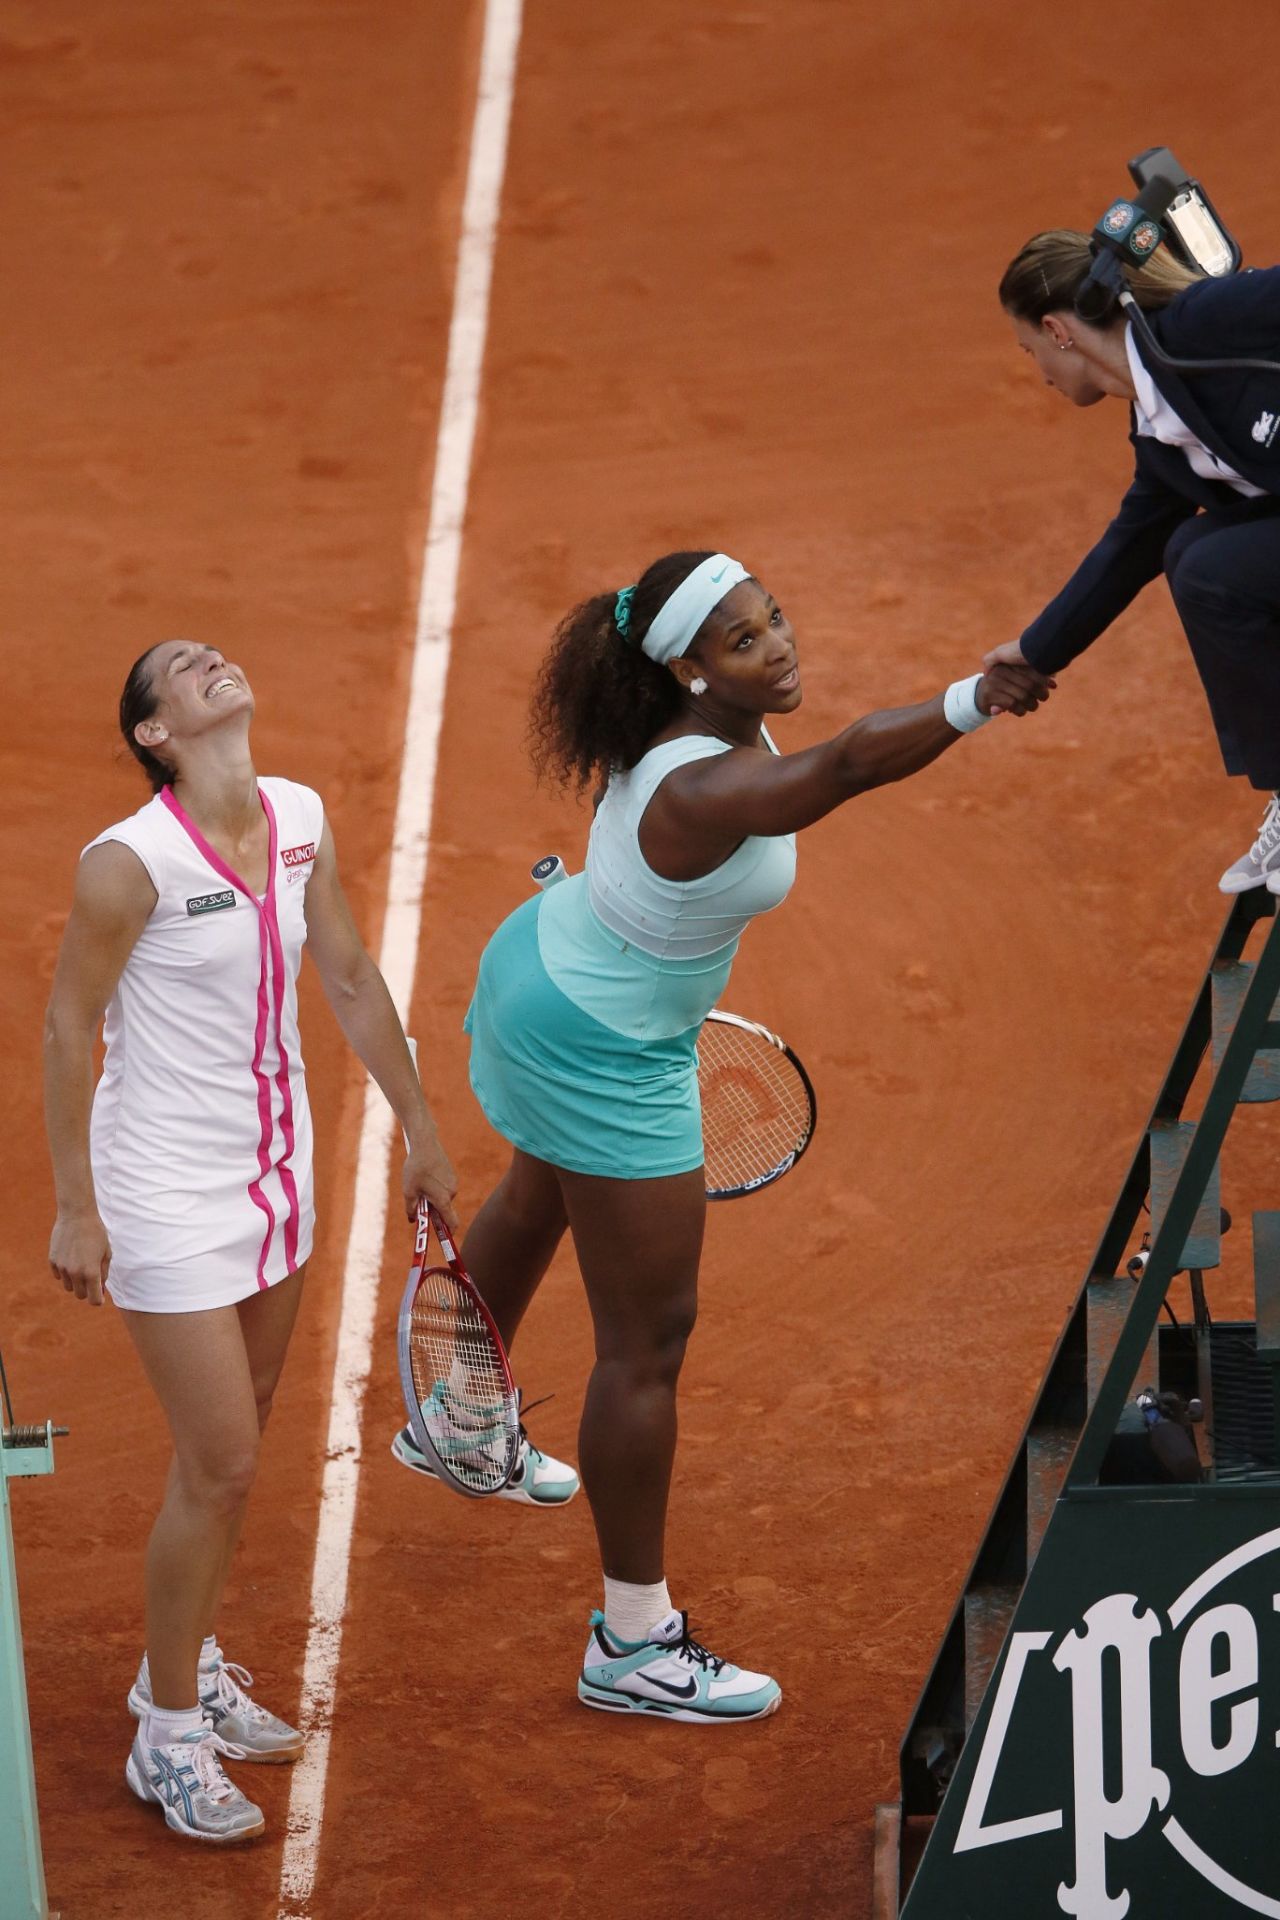 One of the lowest moments of Serena's career came with a first round defeat to unseeded opponent Virginie Razzano at the French Open in 2012. It led many to wonder whether she could recapture the glorious heights of yesteryear.